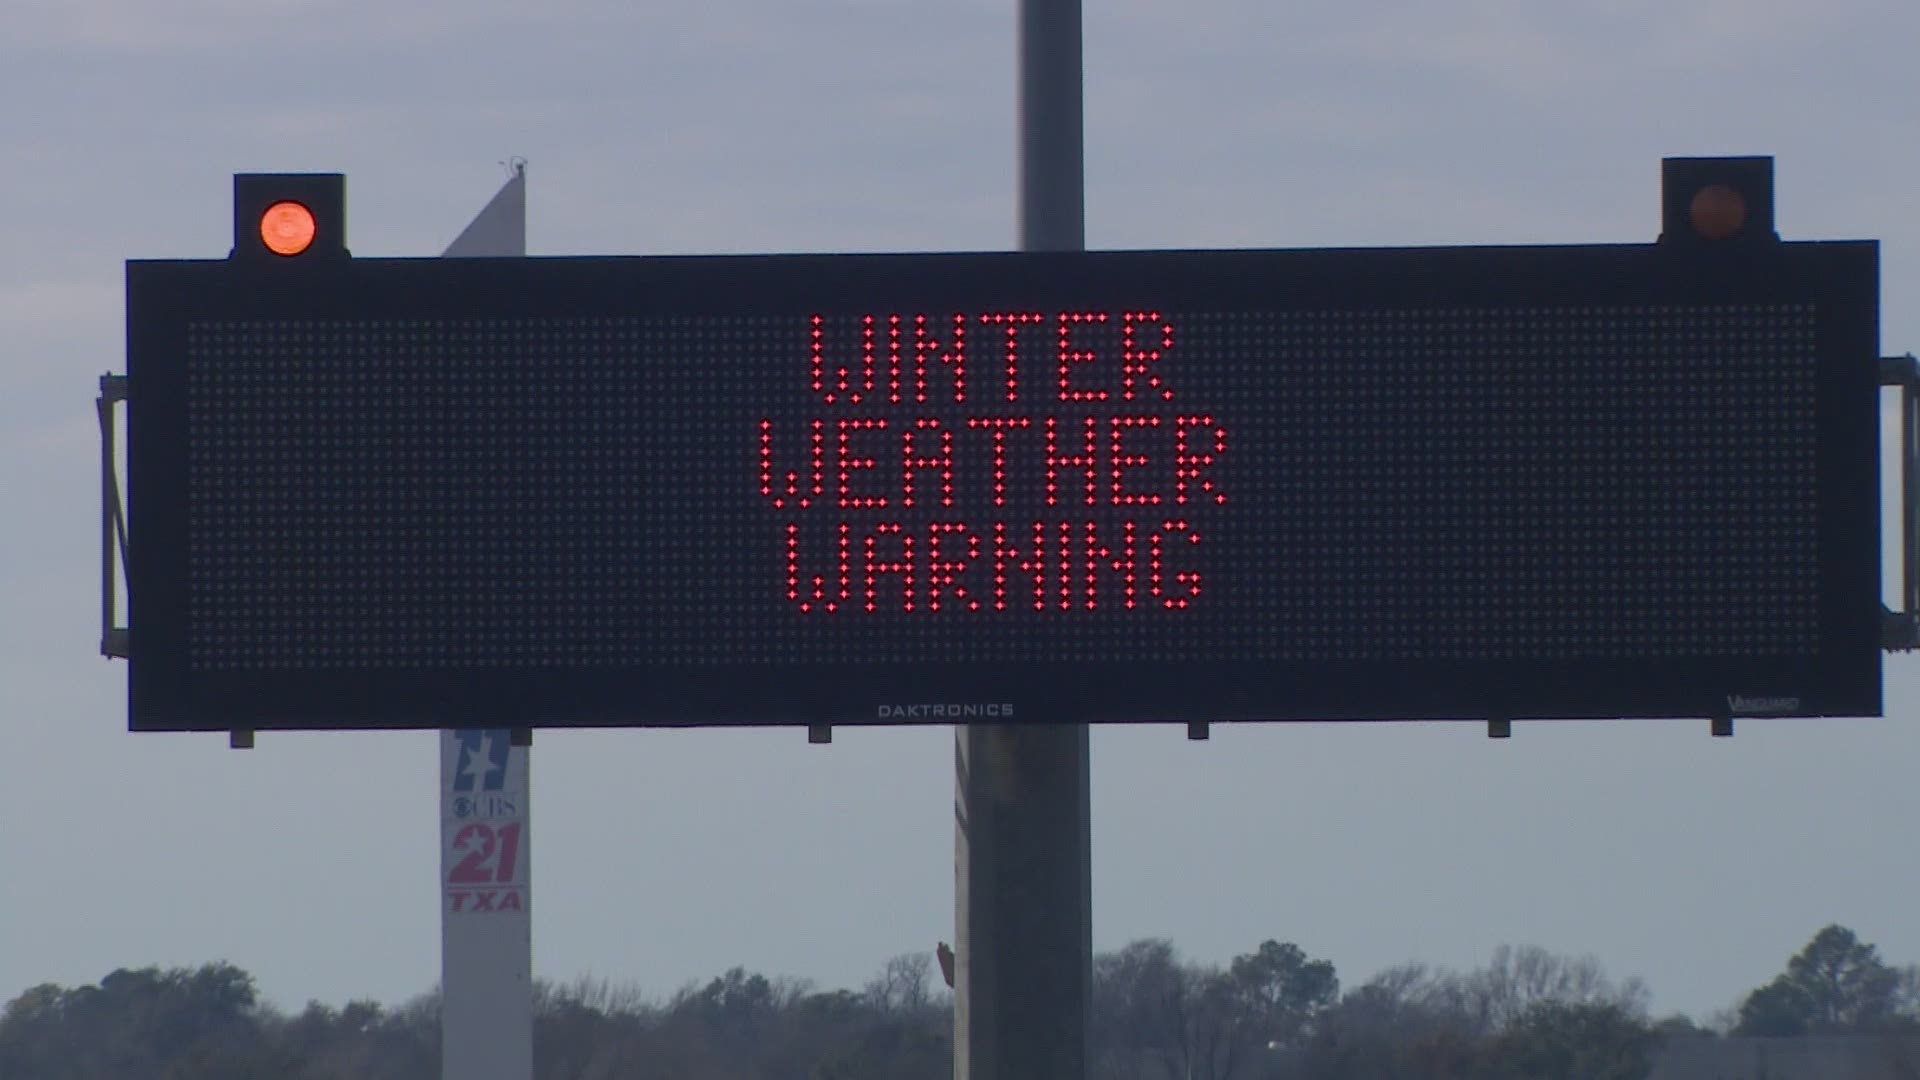 Texas Deportment of Transportation crews spent the last few days prepping roadways for what’s looking like historic winter weather in North Texas Sunday and Monday.